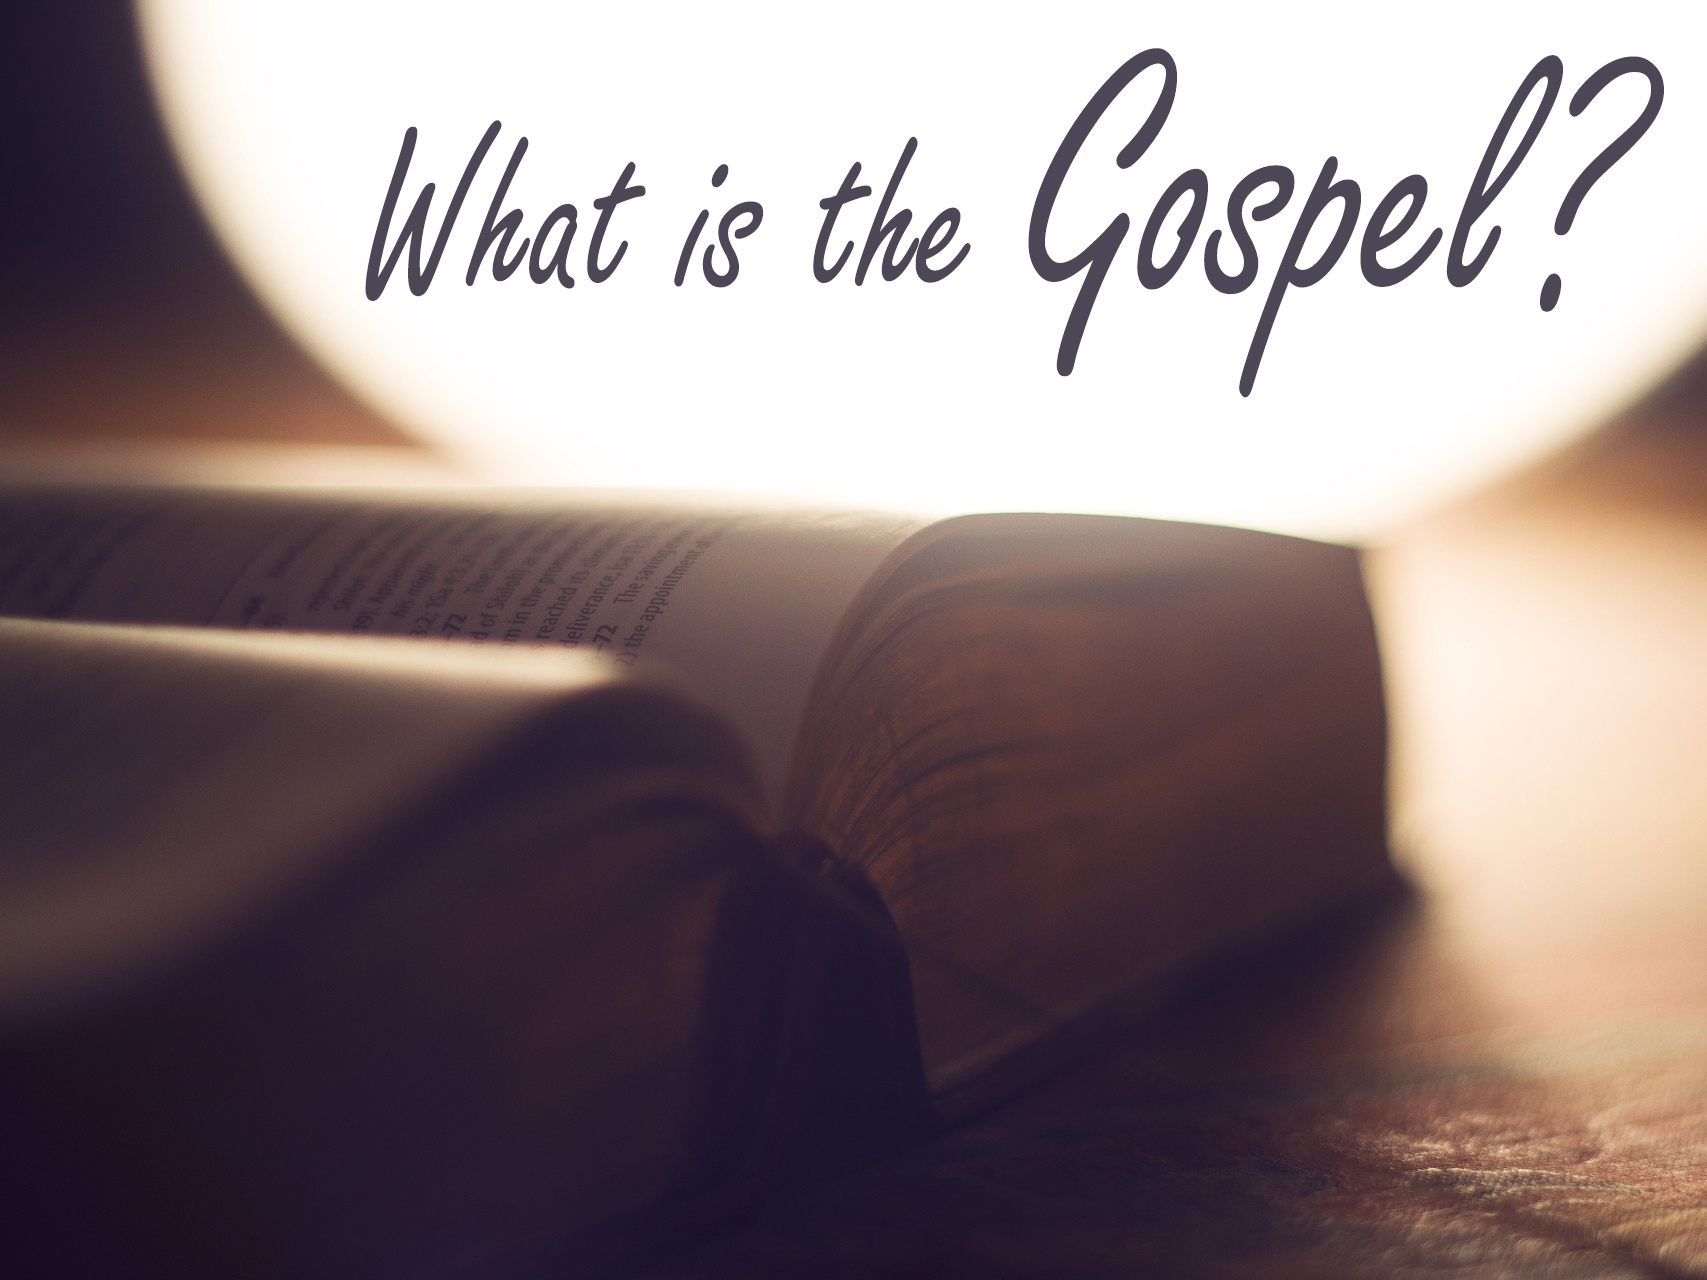 Reaching People for Jesus - What is the Gospel?